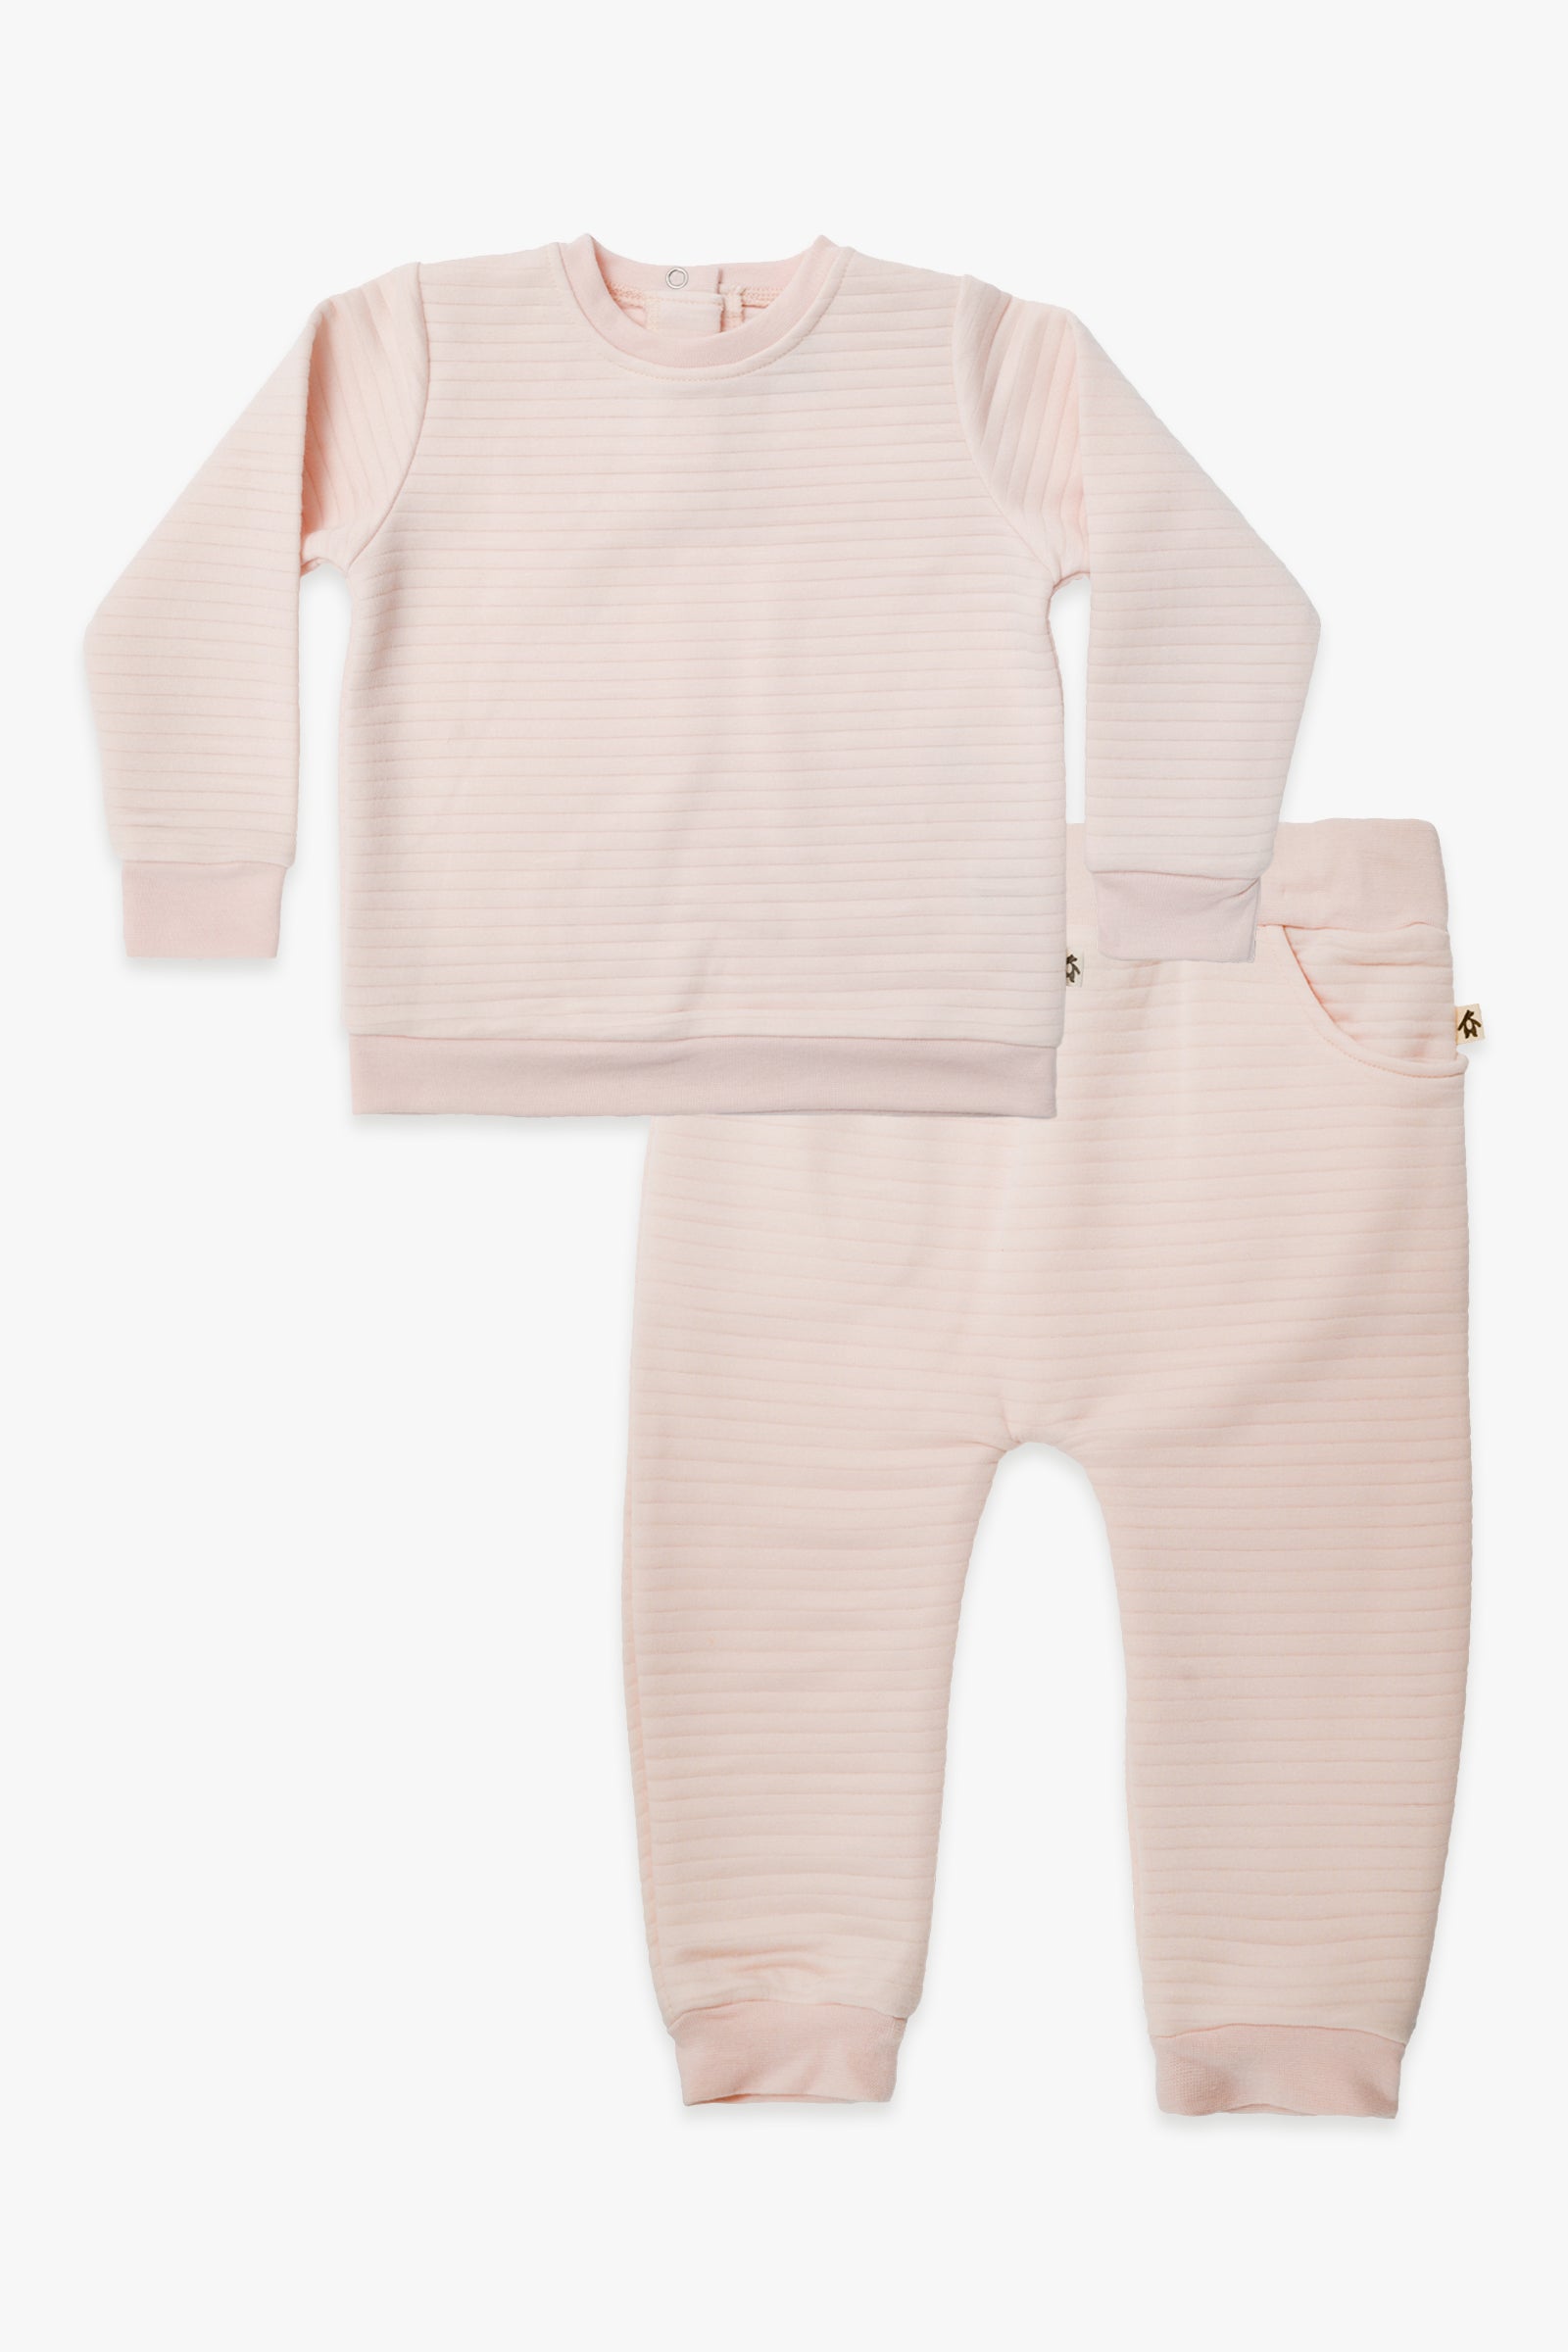 Snugabye Dream Baby Quilted Set - Pink